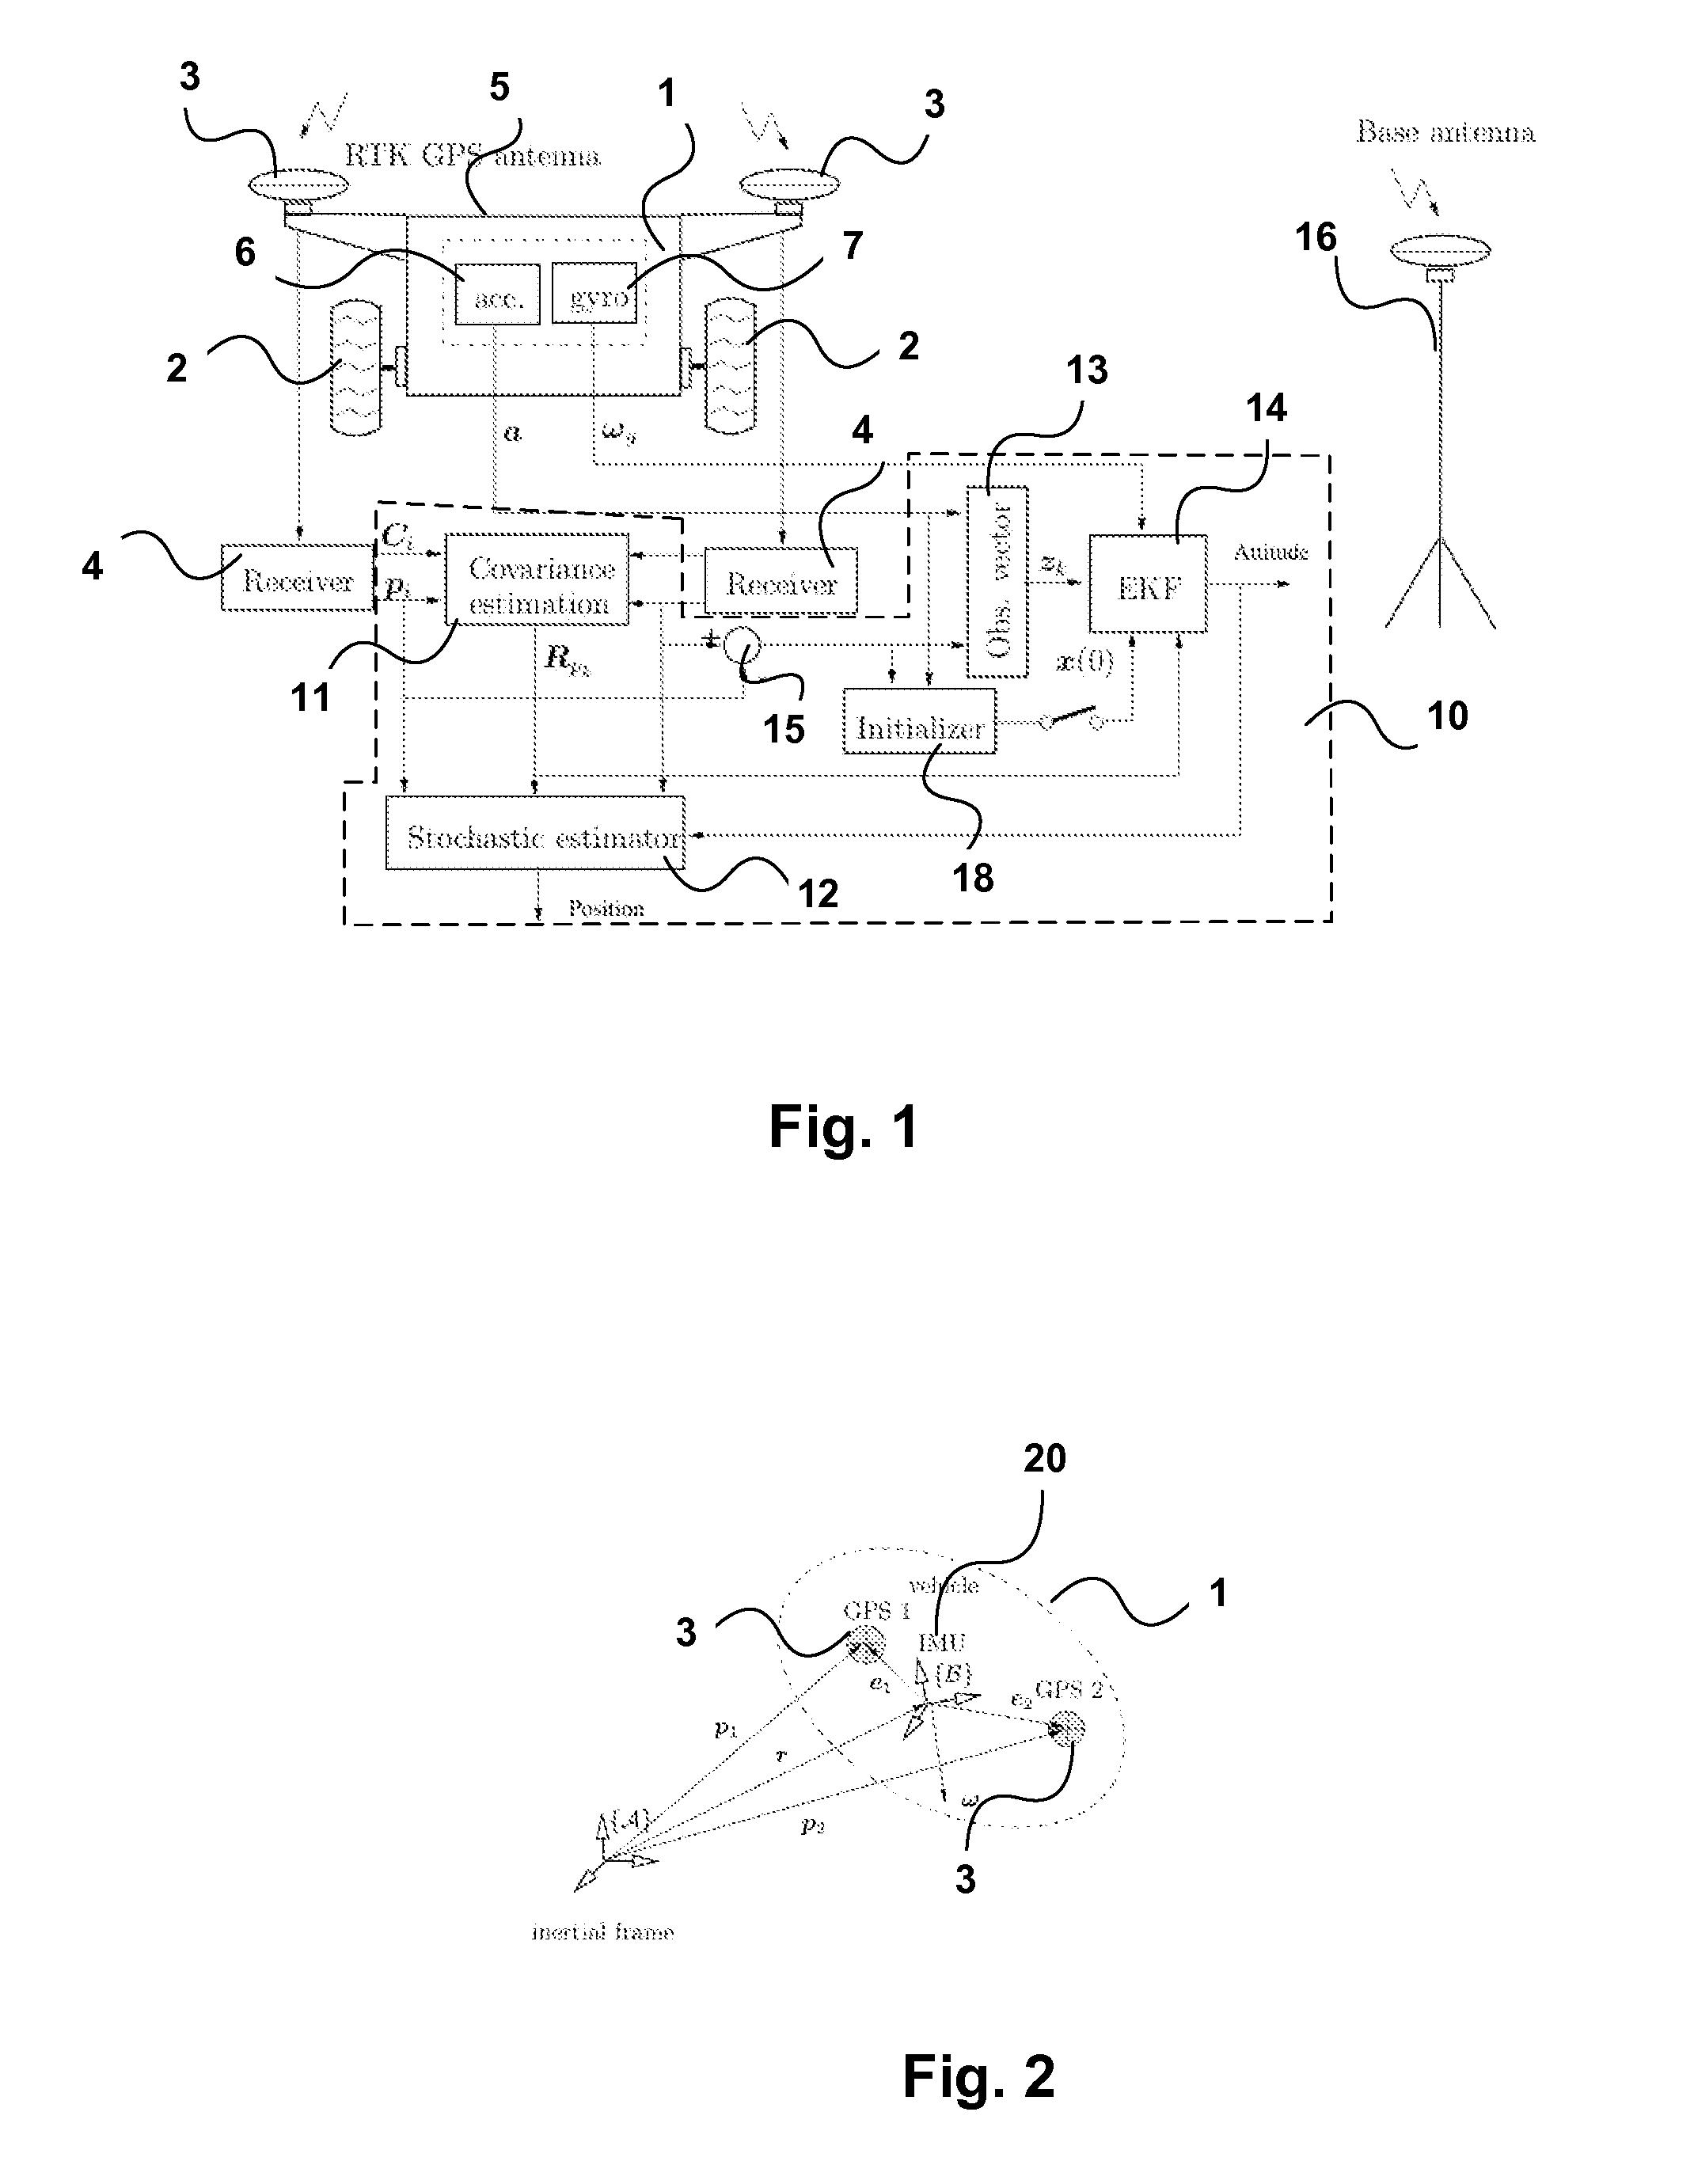 Apparatus and methods for driftless attitude determination and reliable localization of vehicles